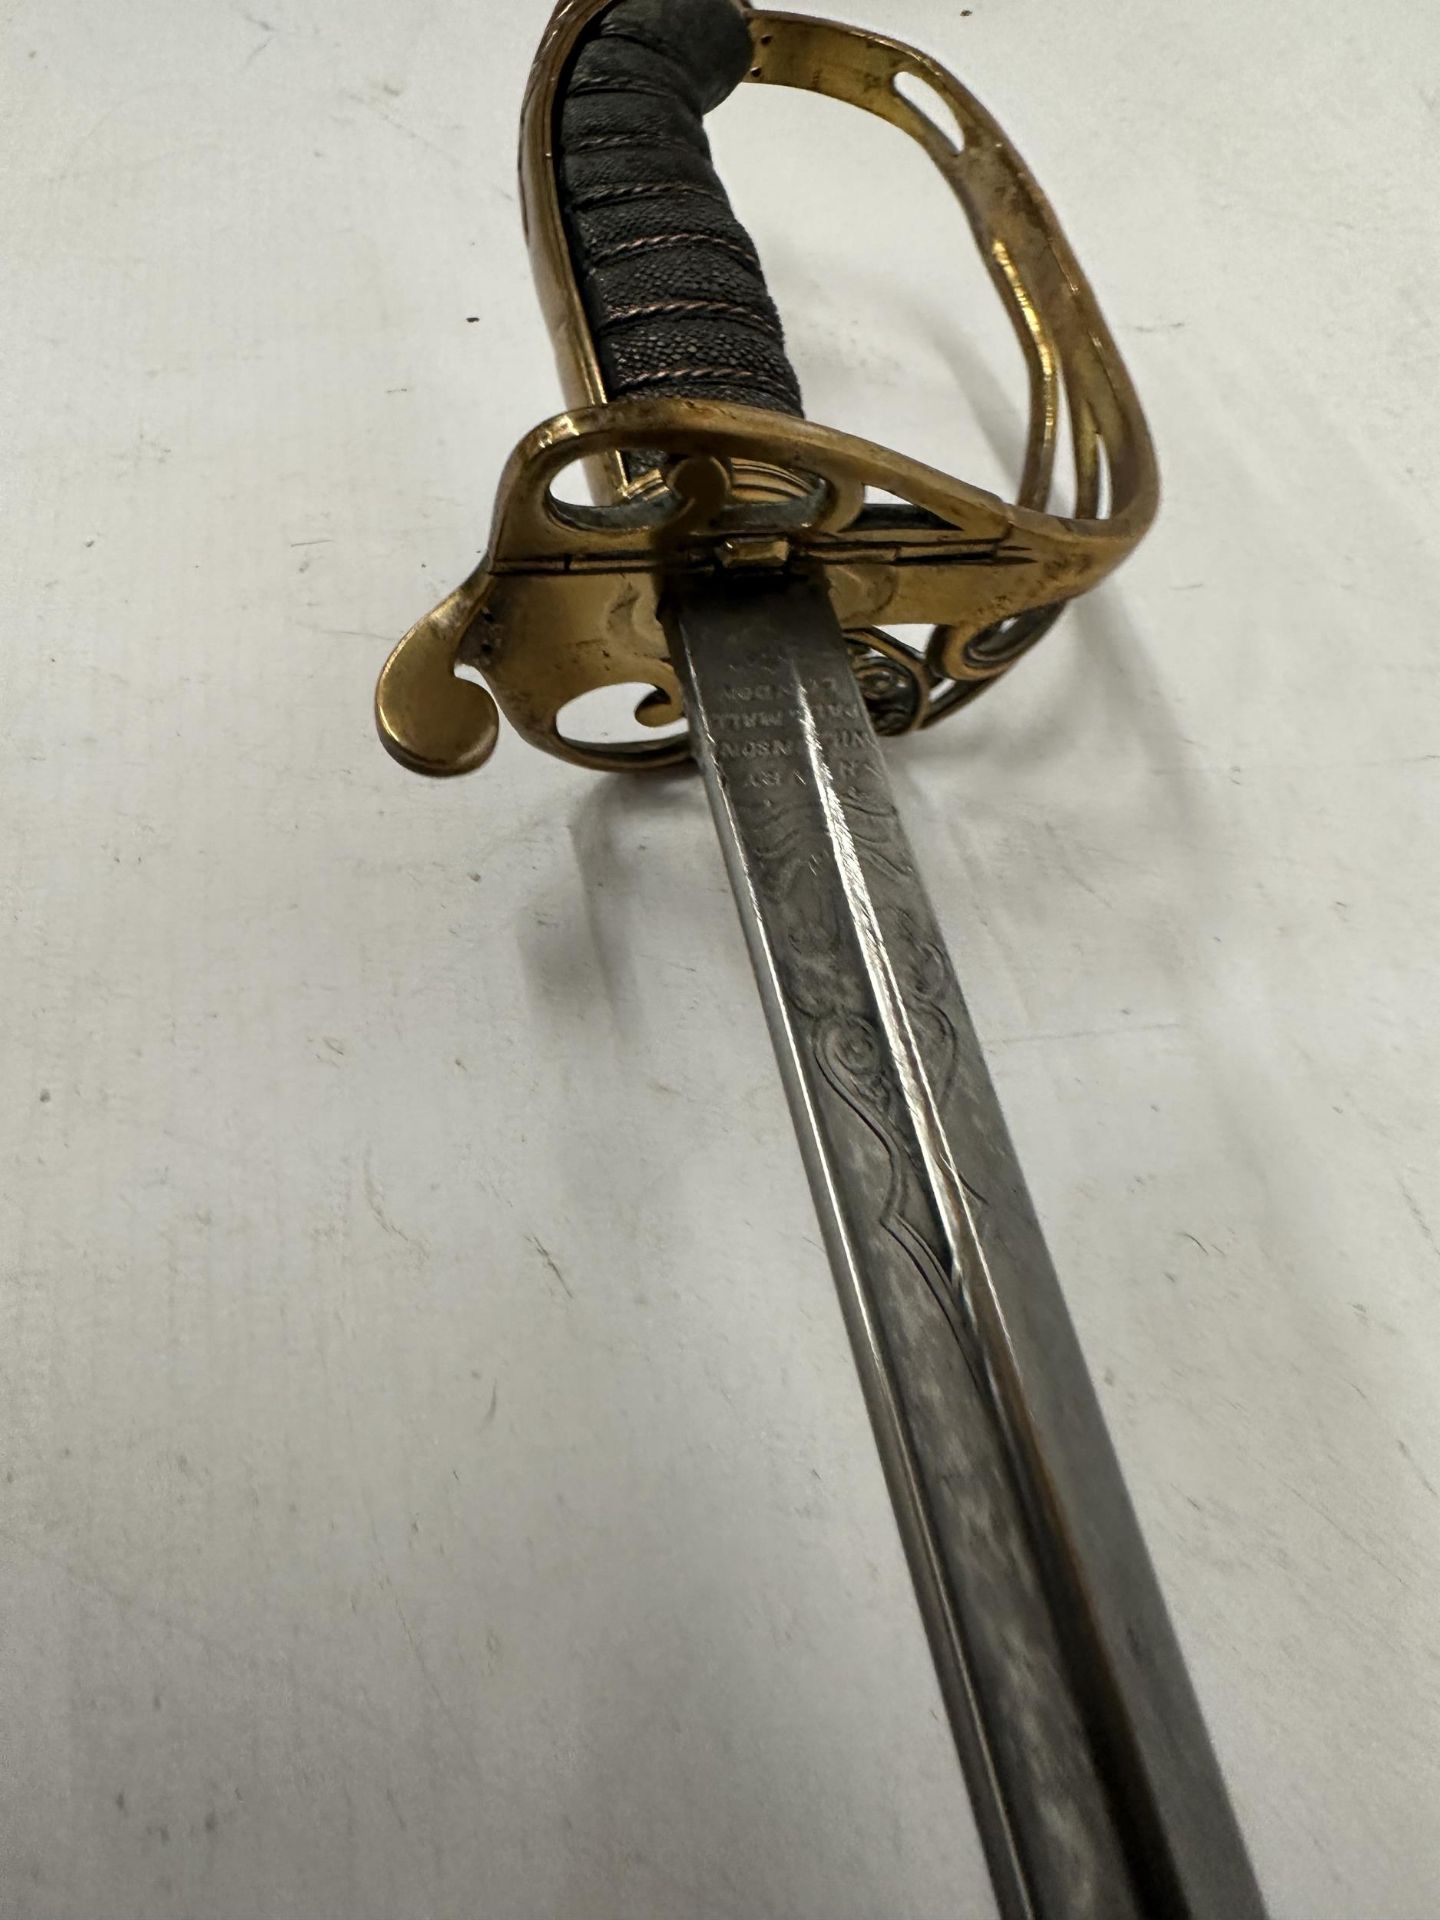 A QUEEN VICTORIA 1845 / 1854 INFANTRY OFFICERS SWORD AND SCABBARD, 73CM BLADE WITH ACID ETCHED - Image 9 of 18